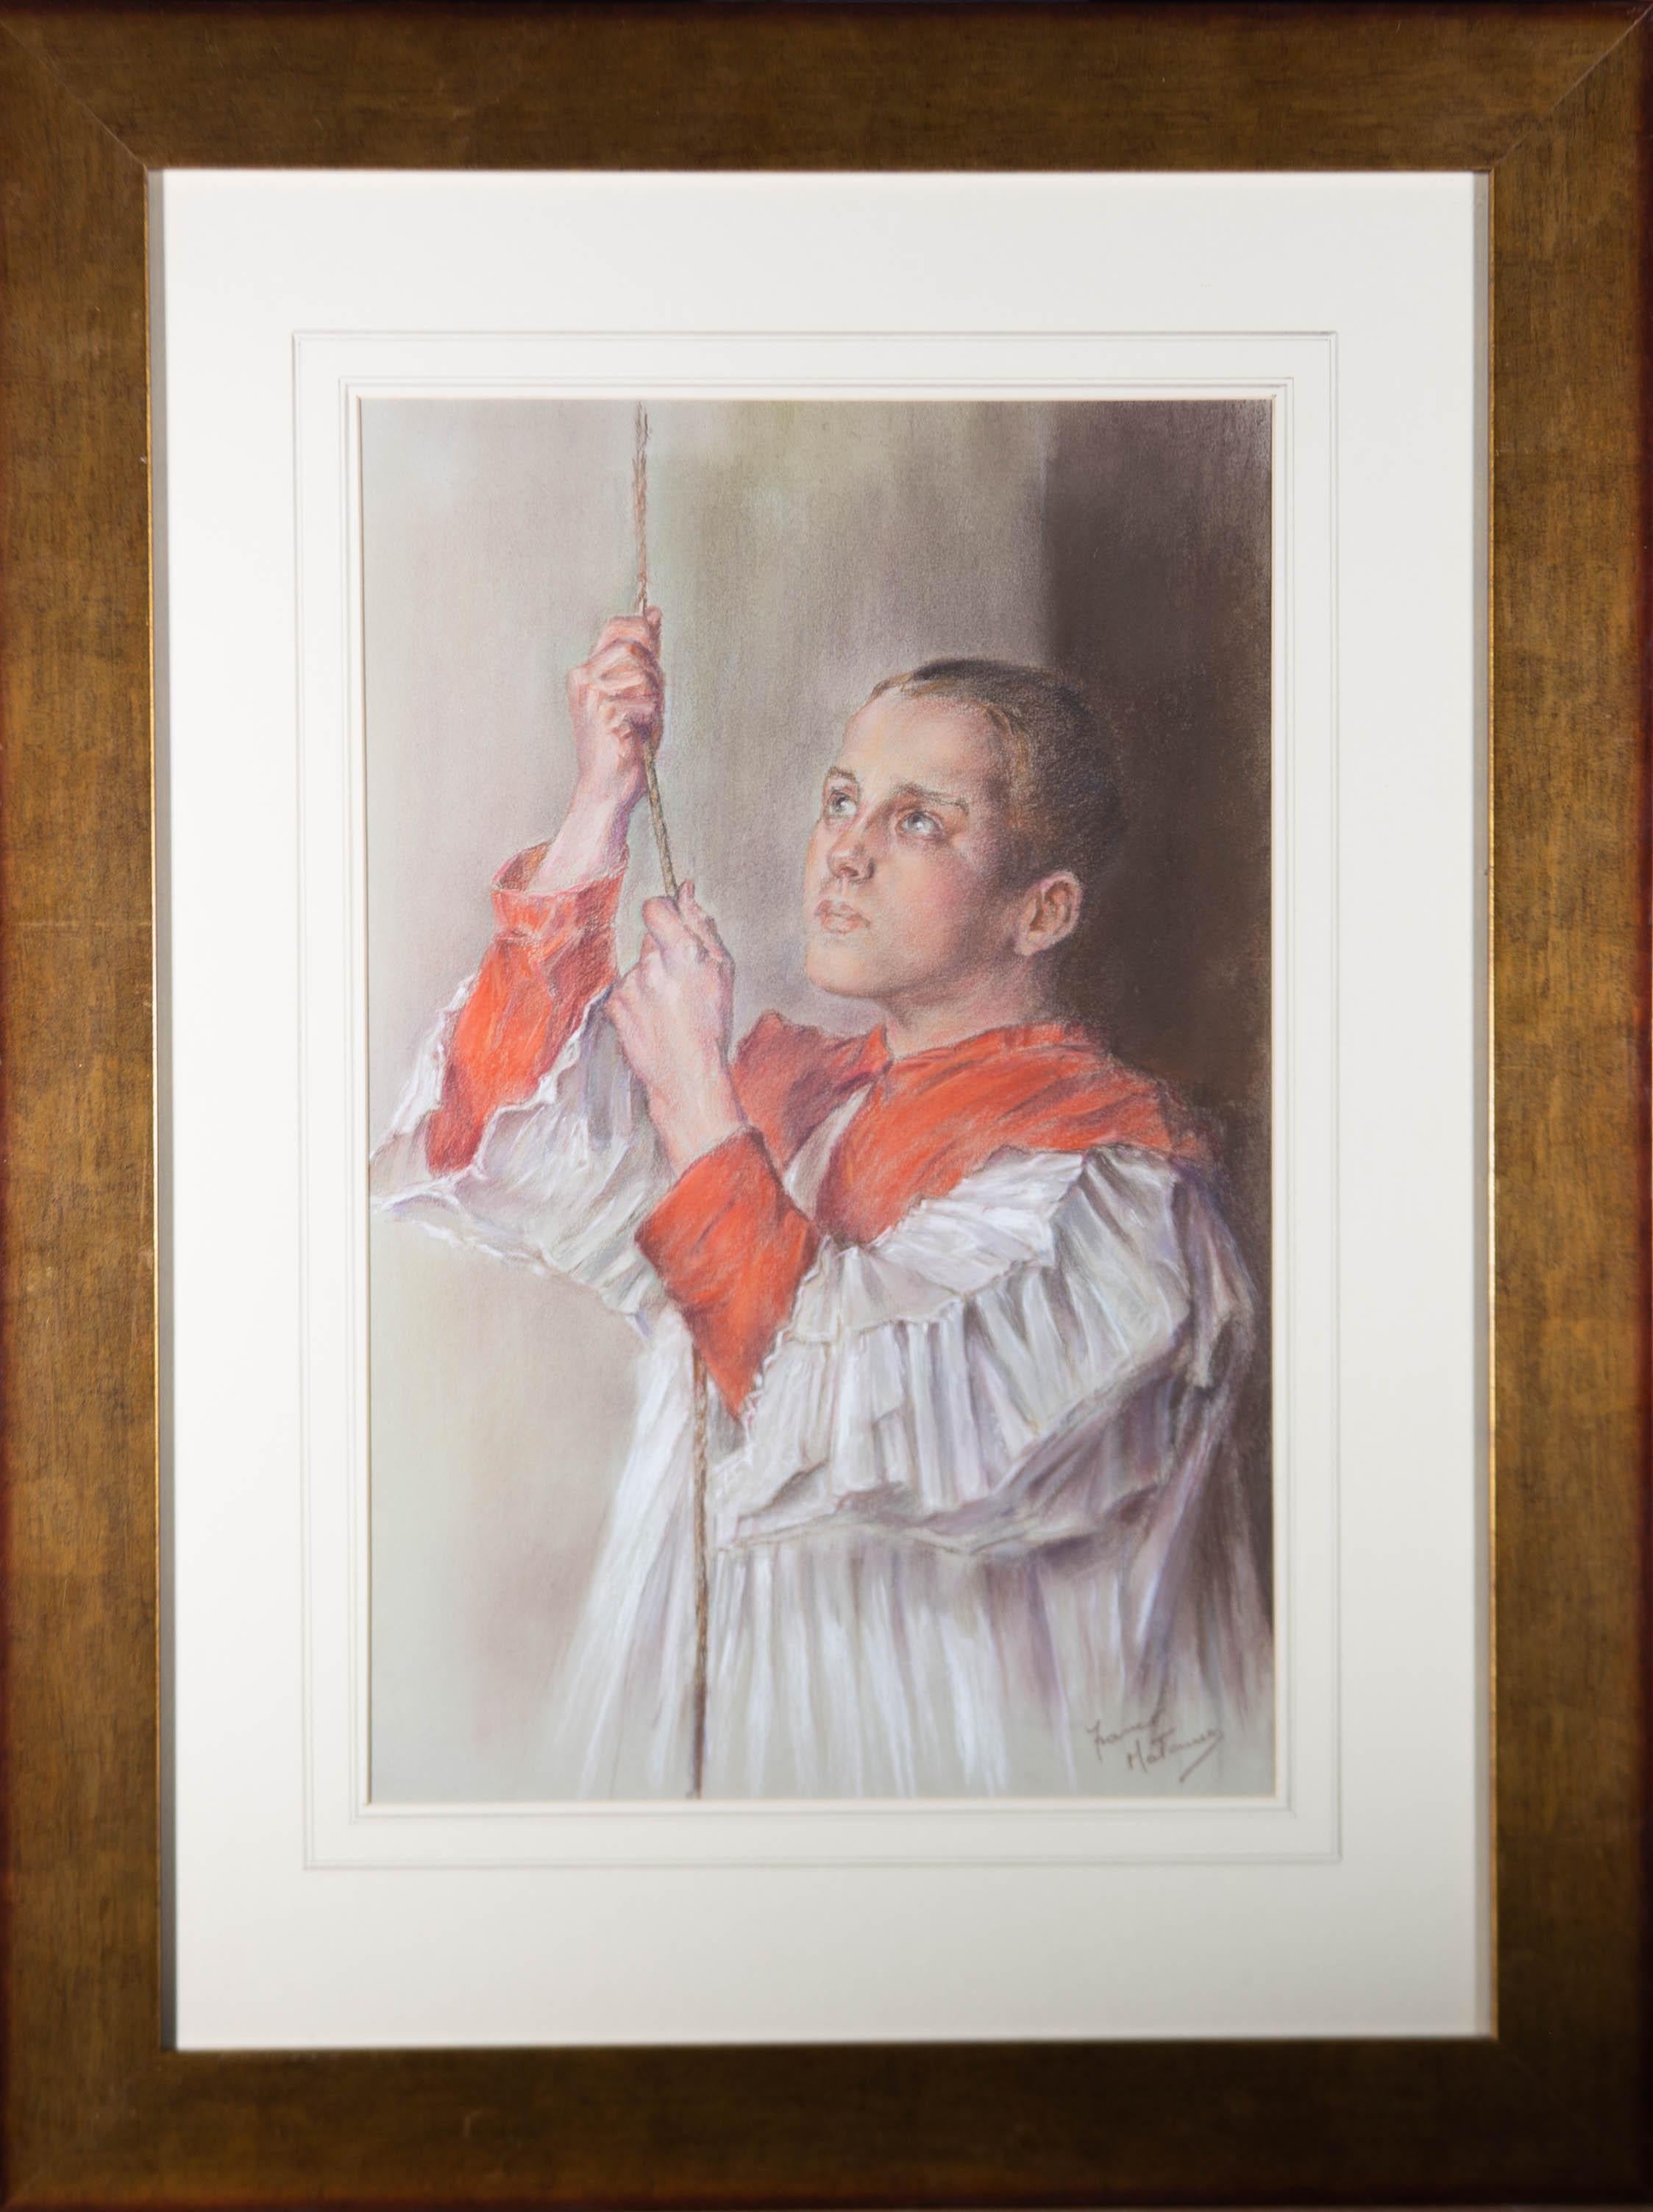 In this chalk portrait, Matania captures a young bell-ringer to a remarkable level of detail. From the crisp white pleats of the gown to the child's expression of unwavering focus, Matania has truly captured the moment in a sublime manner.

The